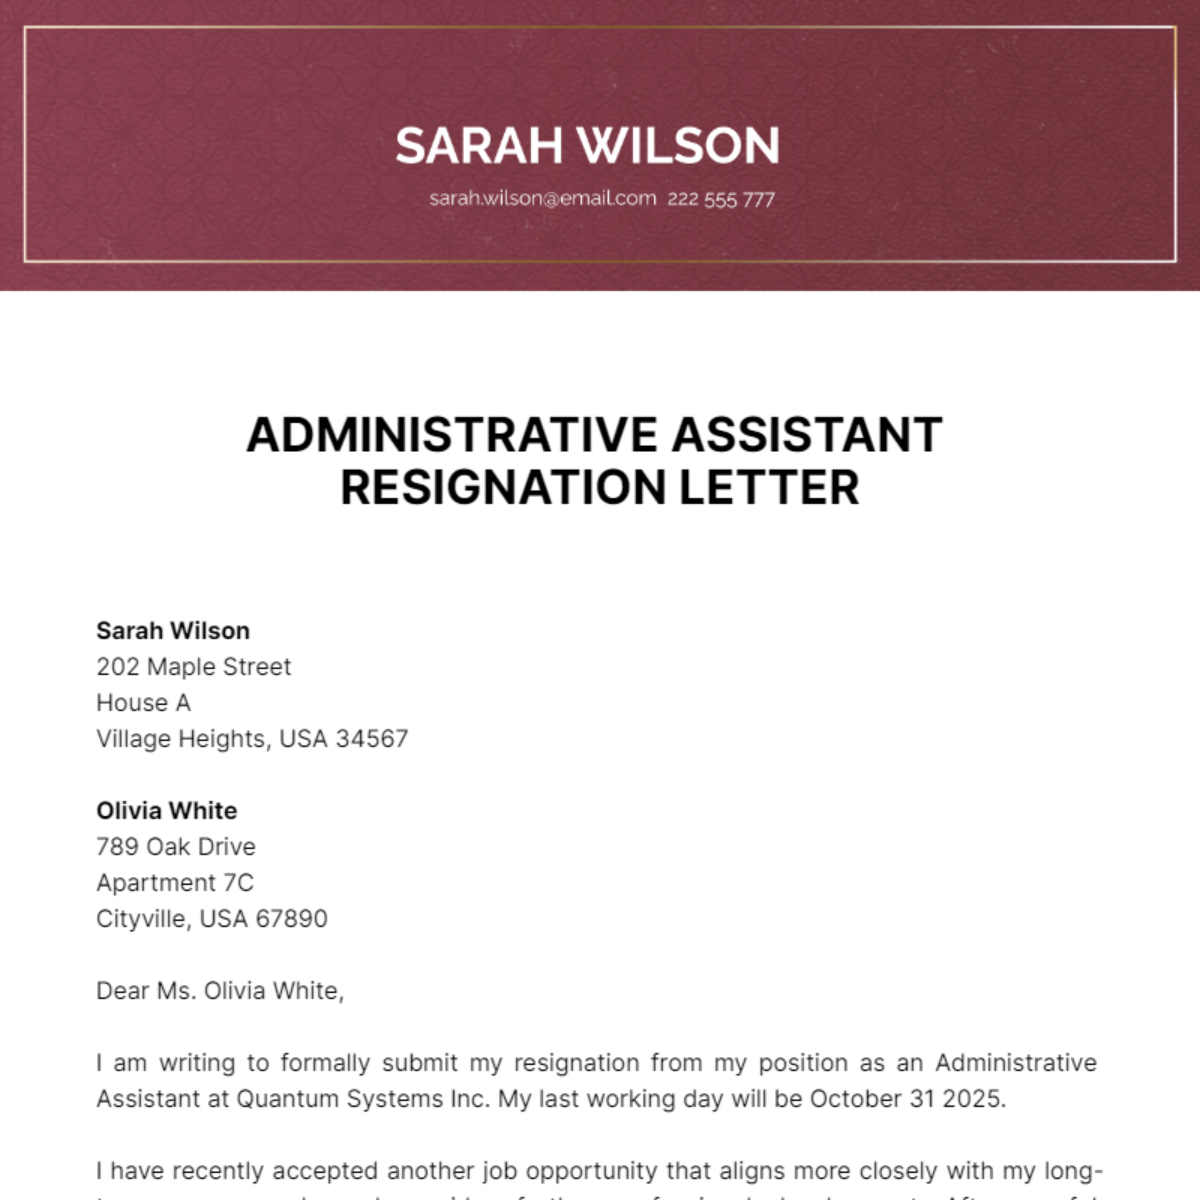 Administrative Assistant Resignation Letter Template